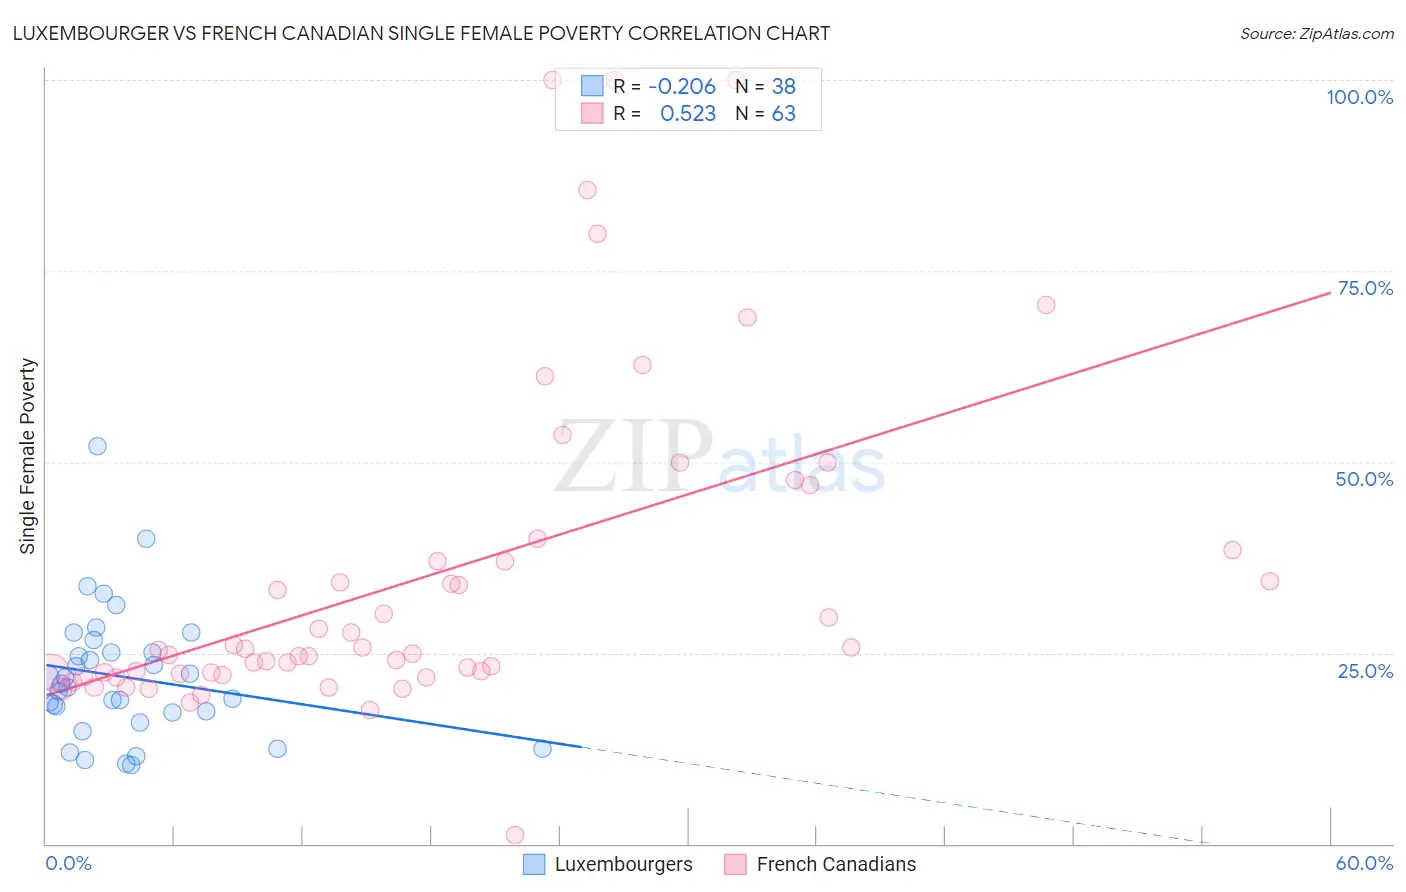 Luxembourger vs French Canadian Single Female Poverty